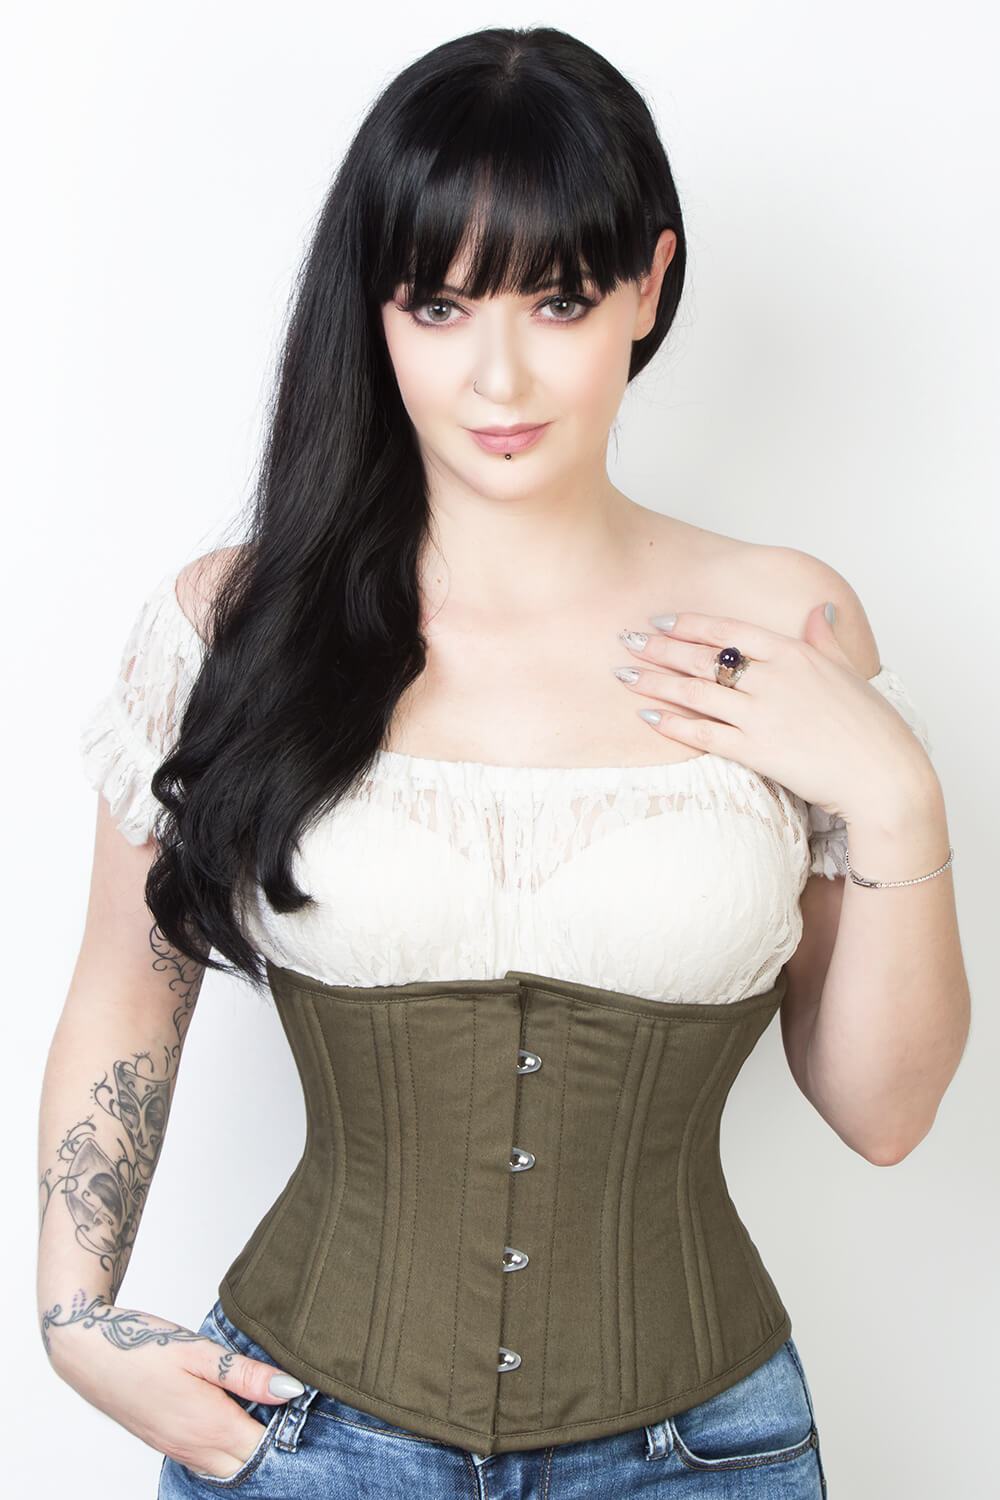 Waist Training Corset Size 20 - For 20 to 22 Inches Natural Waist Size